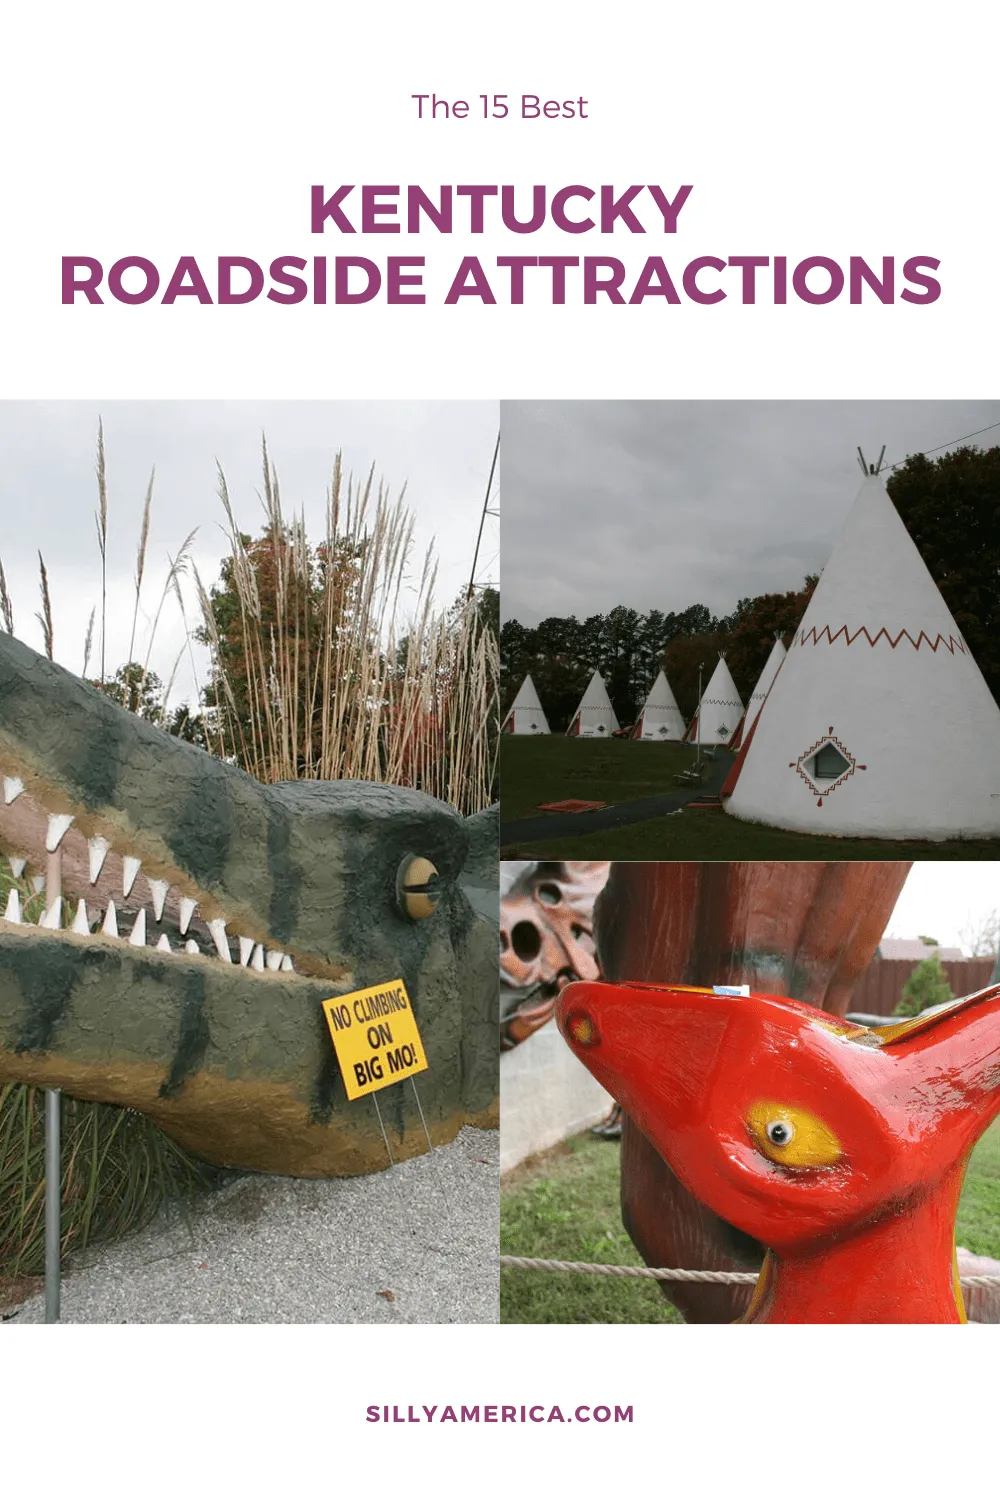 The best Kentucky roadside attractions to visit on a Kentucky road trip. Add these roadside oddities to your travel bucket list, itinerary, or route map! Weird roadside attractions and fun road trip stops for kids and adults. #KentuckyRoadsideAttractions #KentuckyRoadsideAttraction #RoadsideAttractions #RoadsideAttraction #RoadTrip #KentuckyRoadTrip #KentuckyRoadTripBucketLists #KentuckyRoadTripIdeas #KentuckyBucketList #KentuckyPlacesToVisit #WeirdRoadsideAttractions